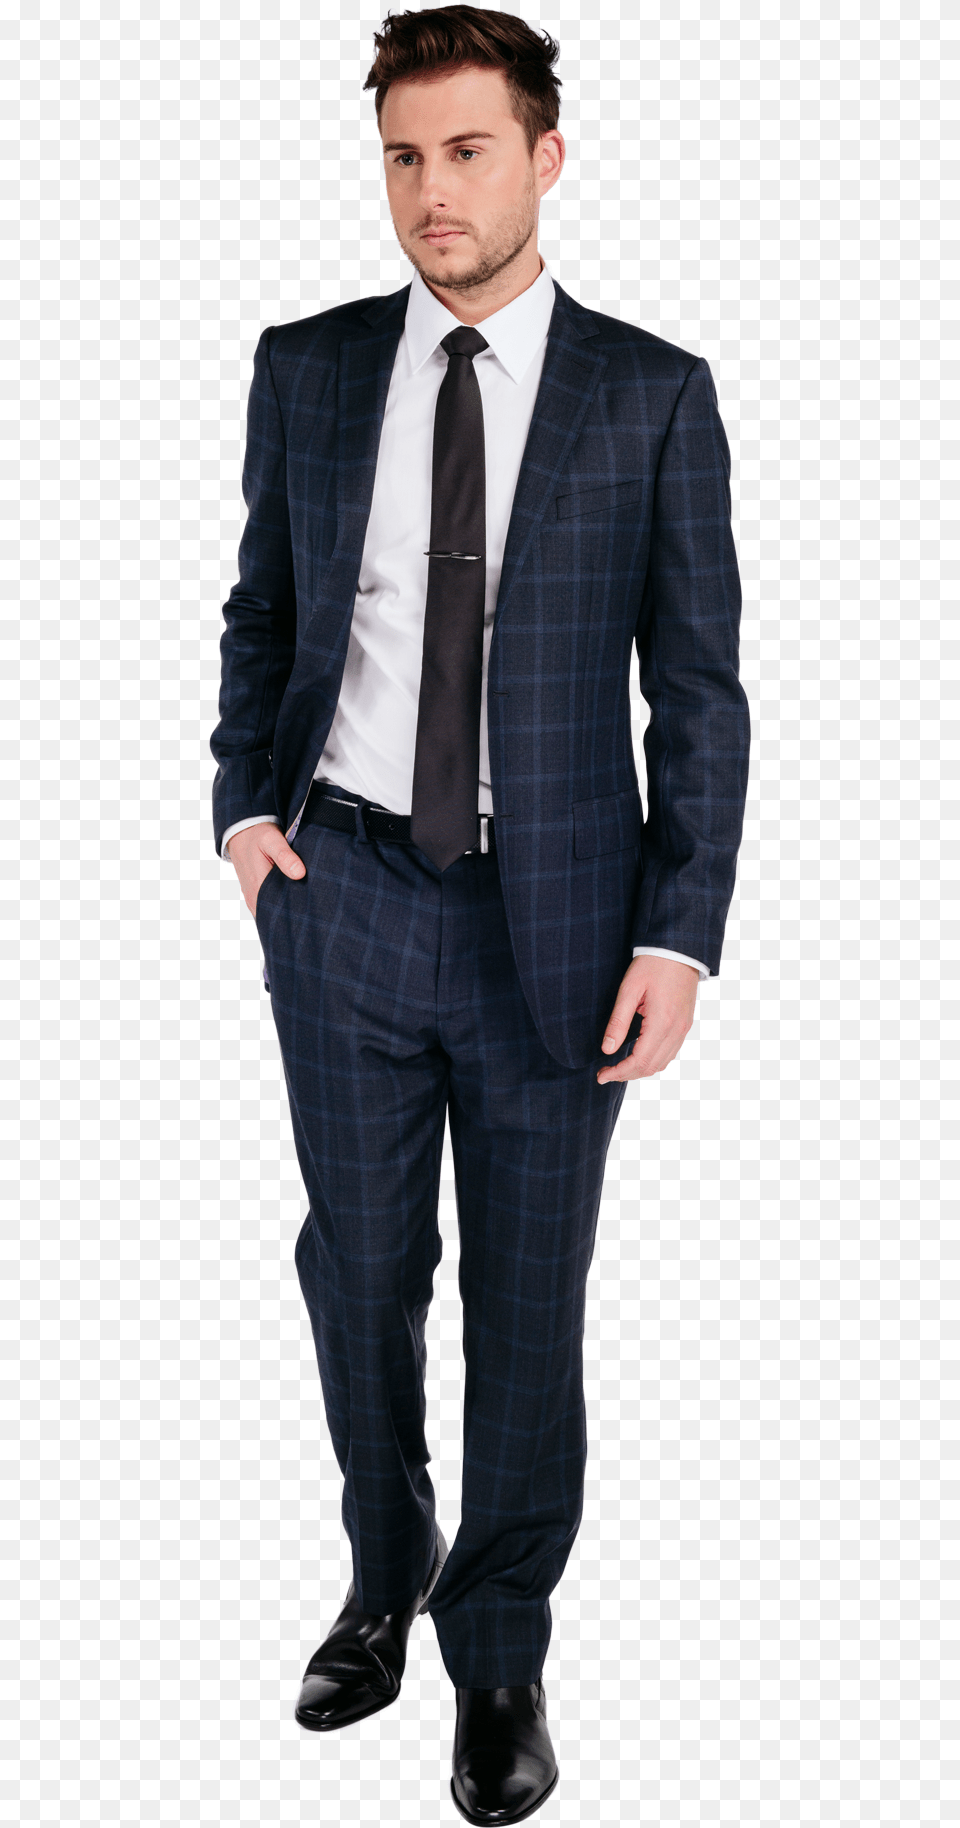 Man In Suit Photo Coat Pant Hd Img, Accessories, Tie, Tuxedo, Formal Wear Png Image